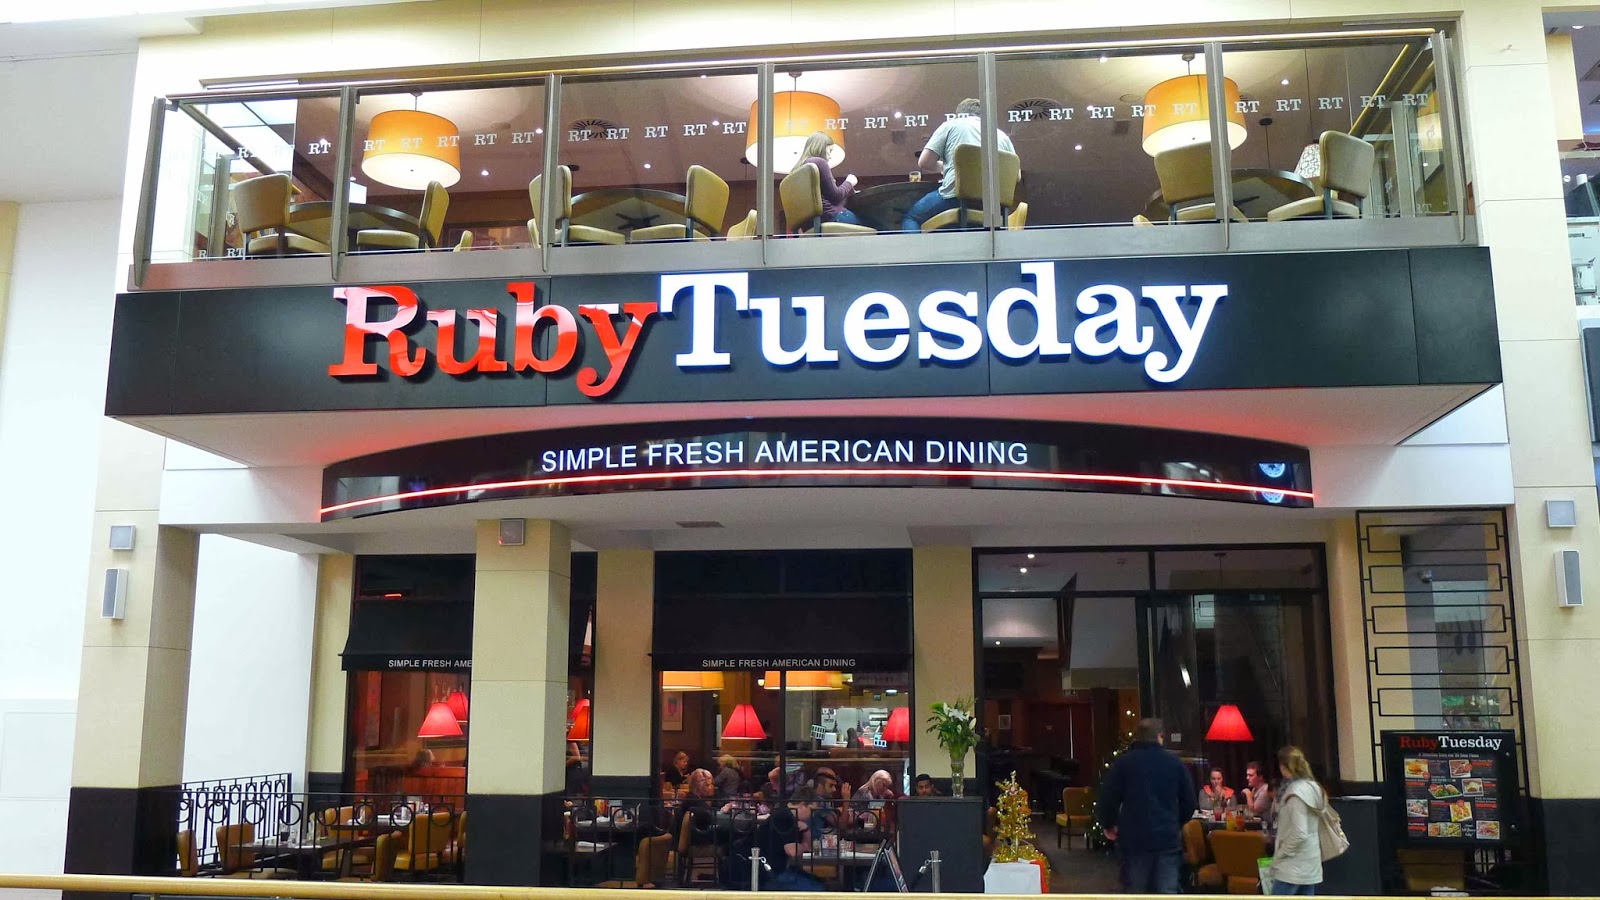 Ruby Tuesday menu prices featuring 87 items ranging from $1.00 to $20.99